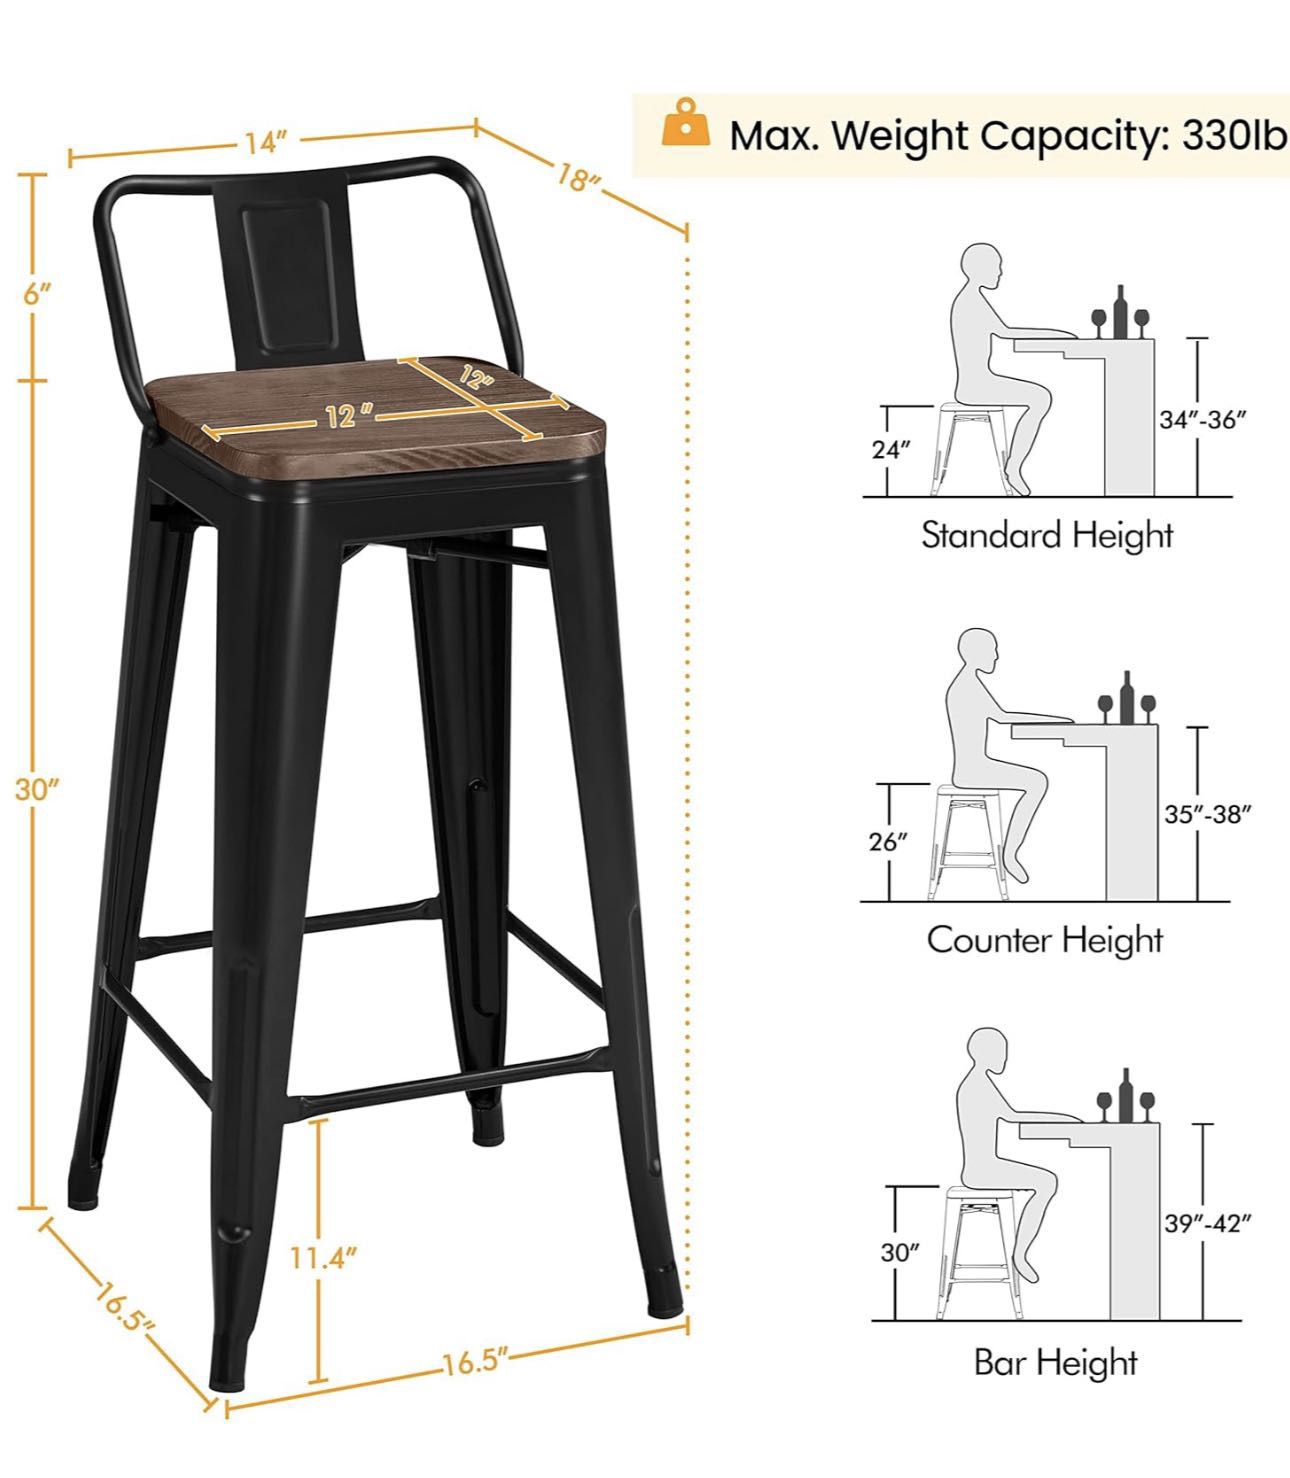 30" Metal Barstools Set of 4 Bar Height Bar Stools with Wooden Top Low Back Industrial Bar Stools Metal Stool for Indoor-Outdoor Counter Stools with W